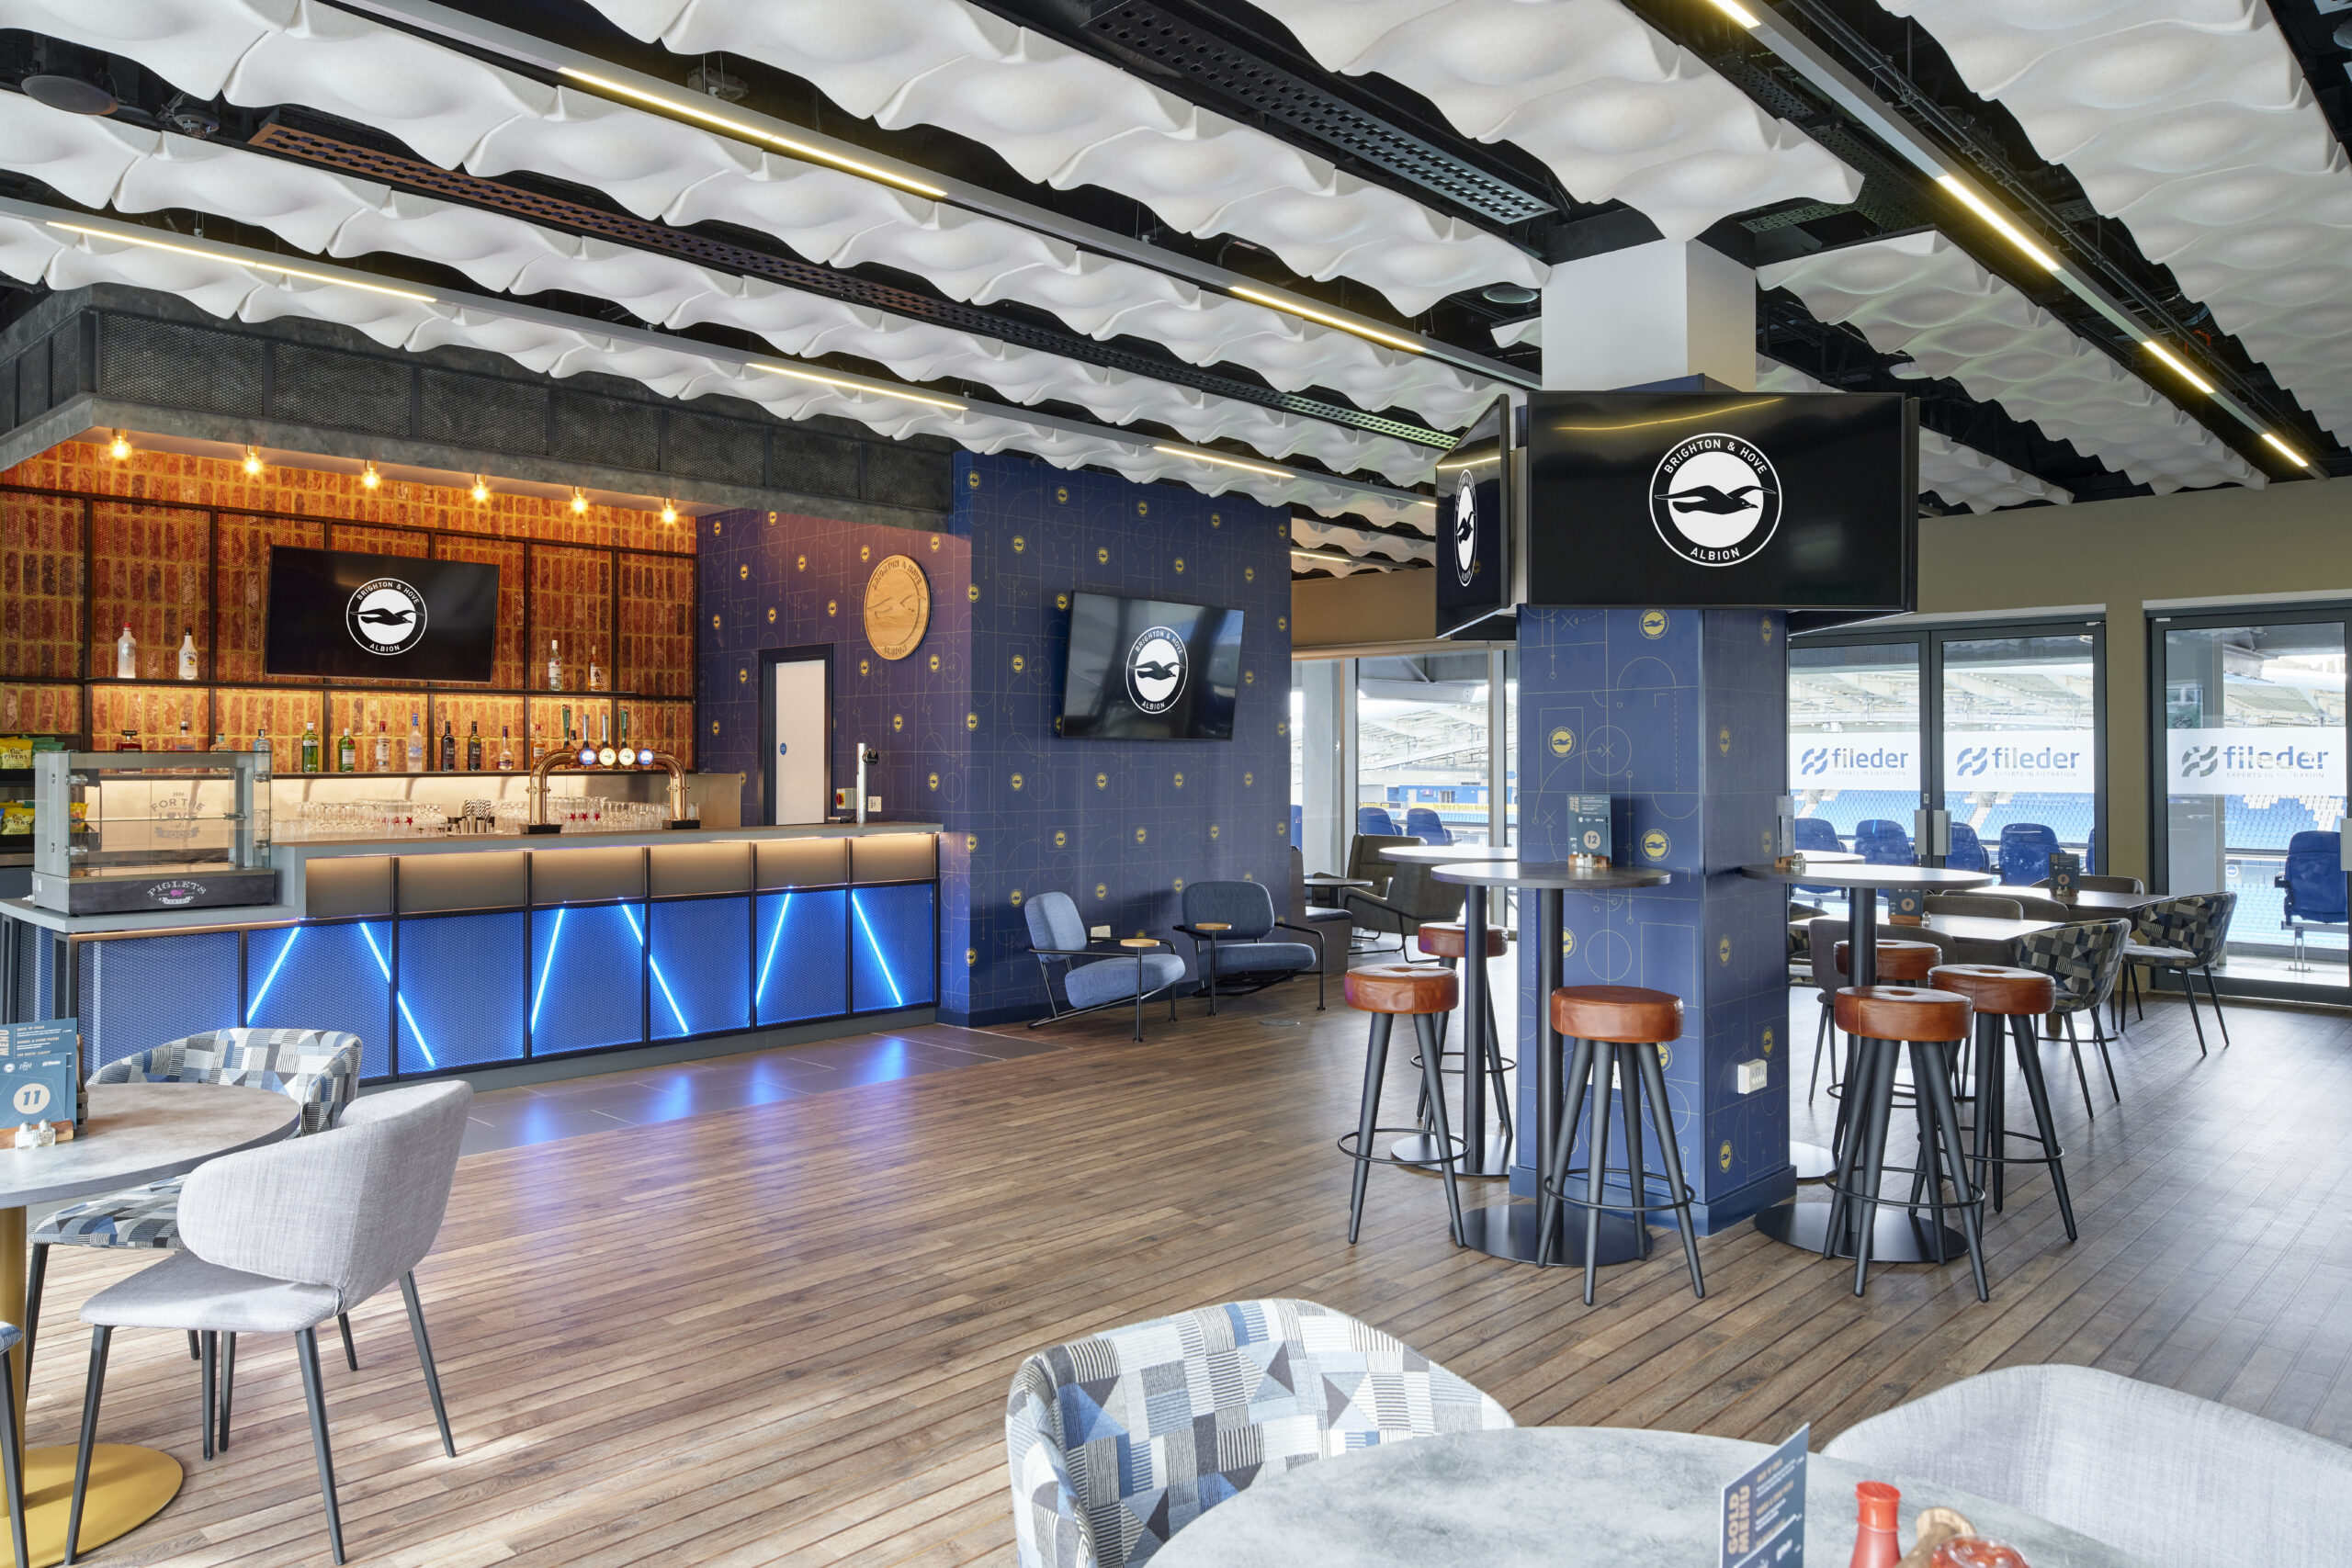 Brighton And Hove Albion Fc’s Amex Stadium Hospitality Suite Upgrades By Kss Architects